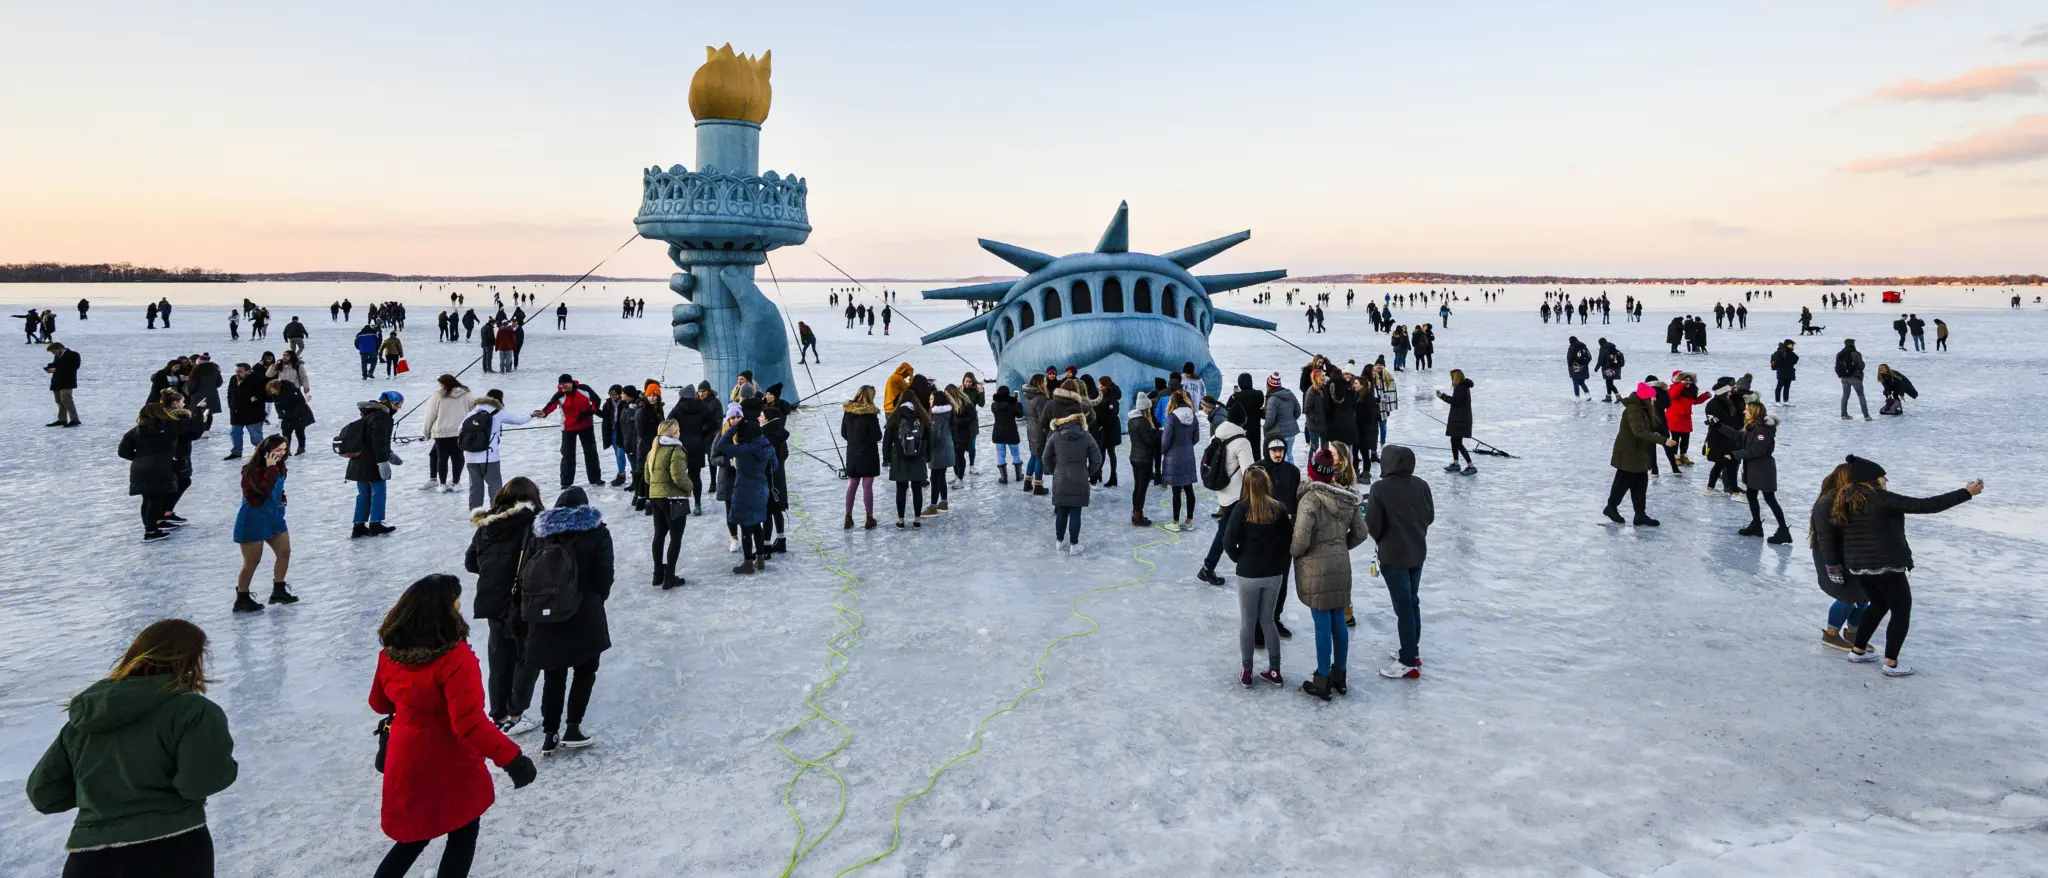 Visitors pose for pictures with an inflatable replica of the Statue of Liberty on frozen and snow-covered Lake Mendota near the shoreline of the Memorial Union Terrace